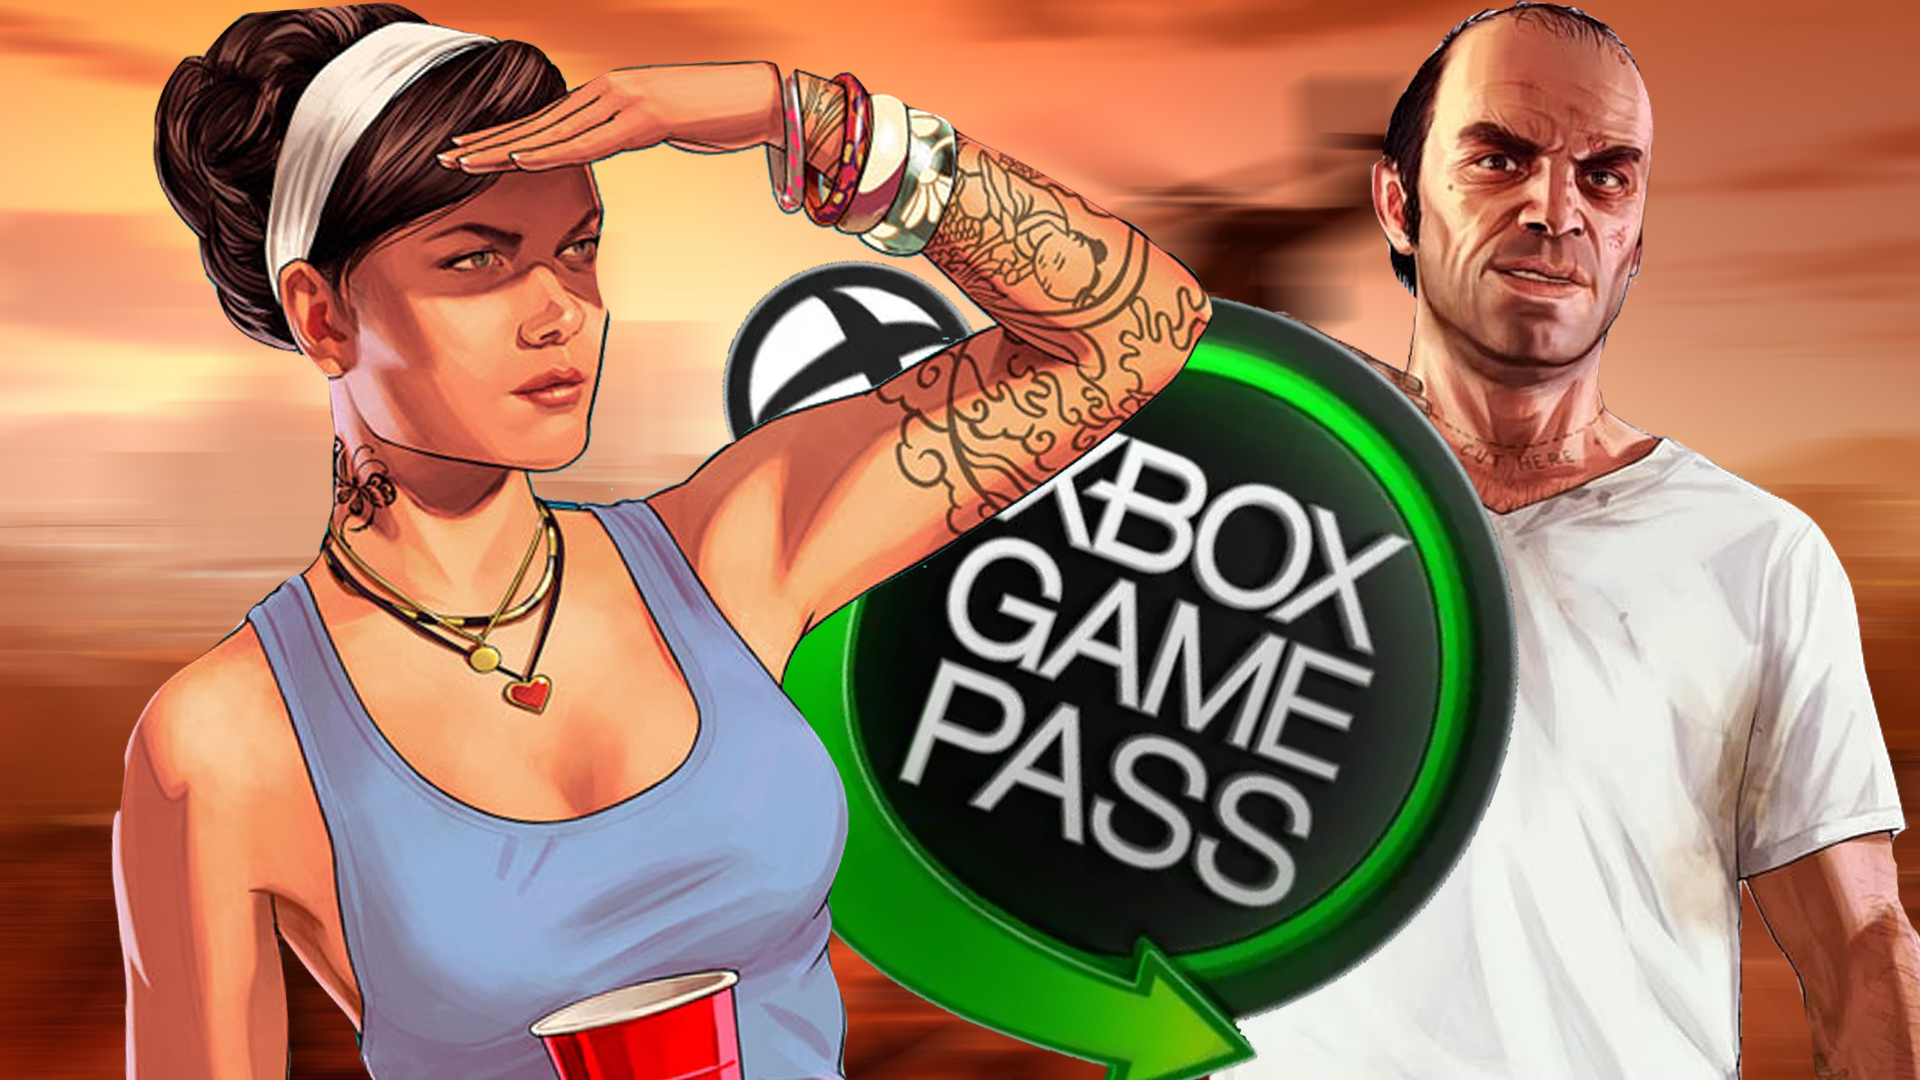 GTA 5 returns to Xbox Game Pass with smooth 60 FPS and action aplenty